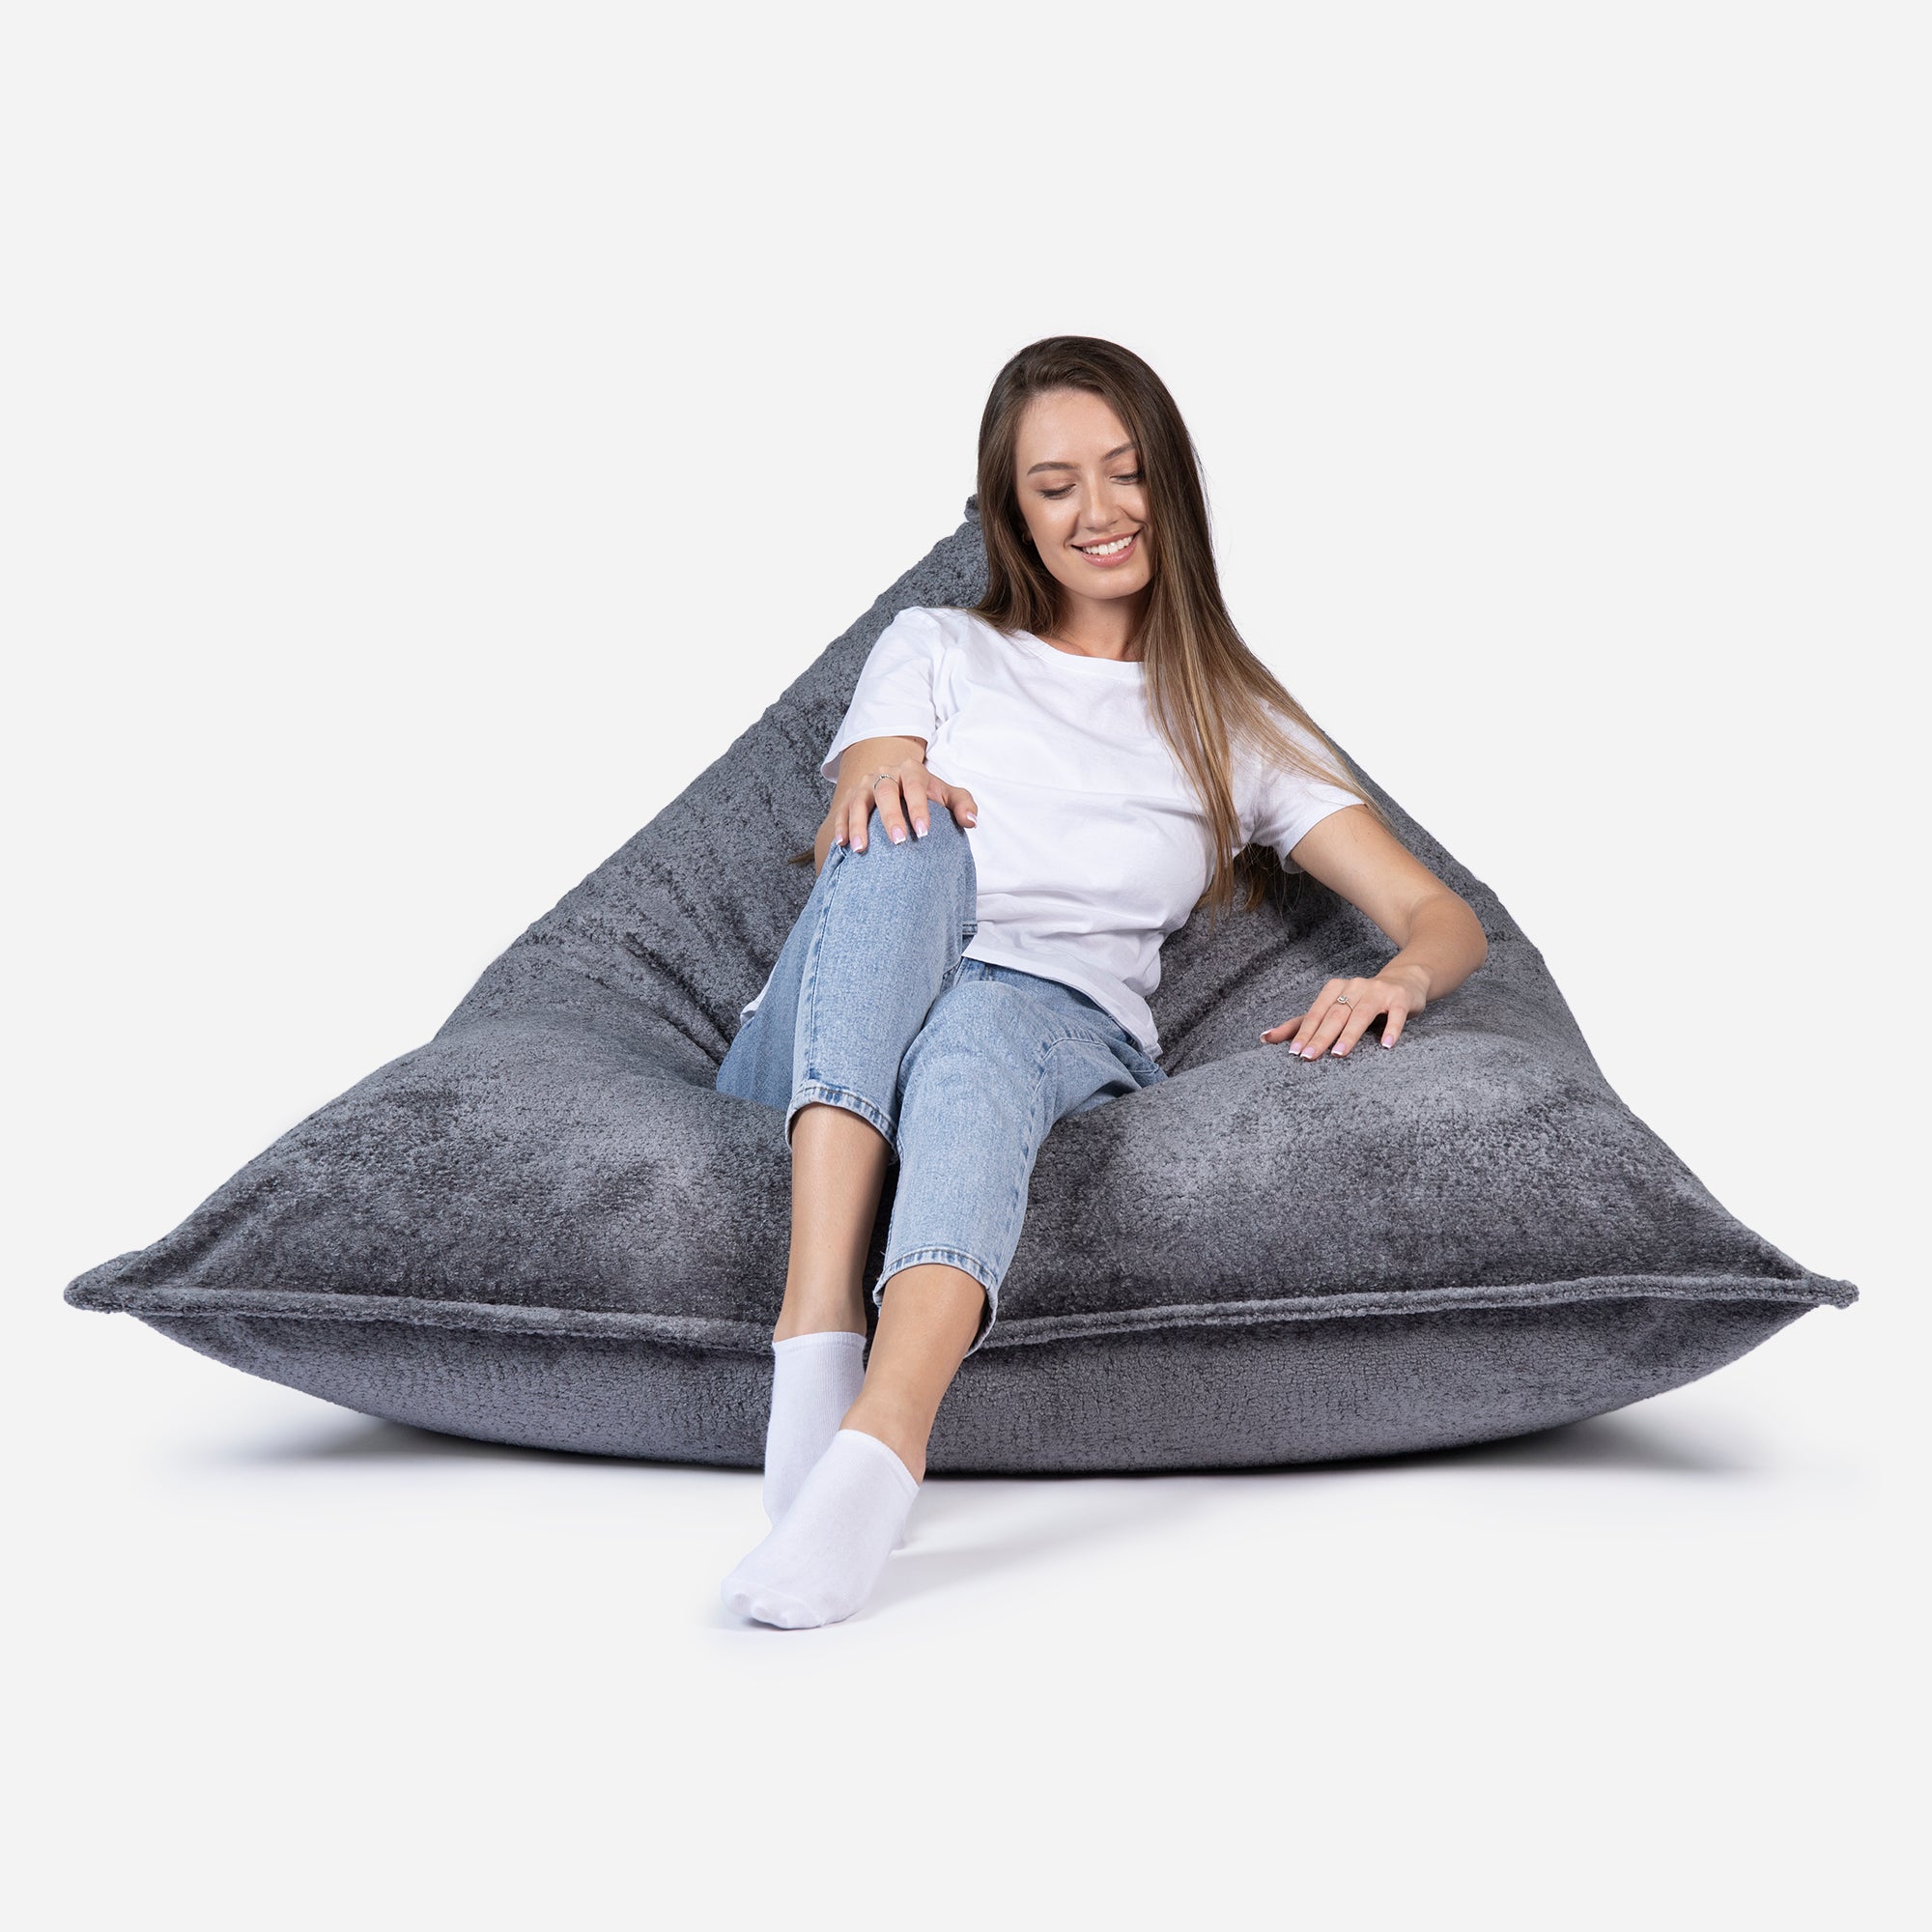 Beanbag Sloppy design fluffy fabric Dark Gray color  with girl seating on it 